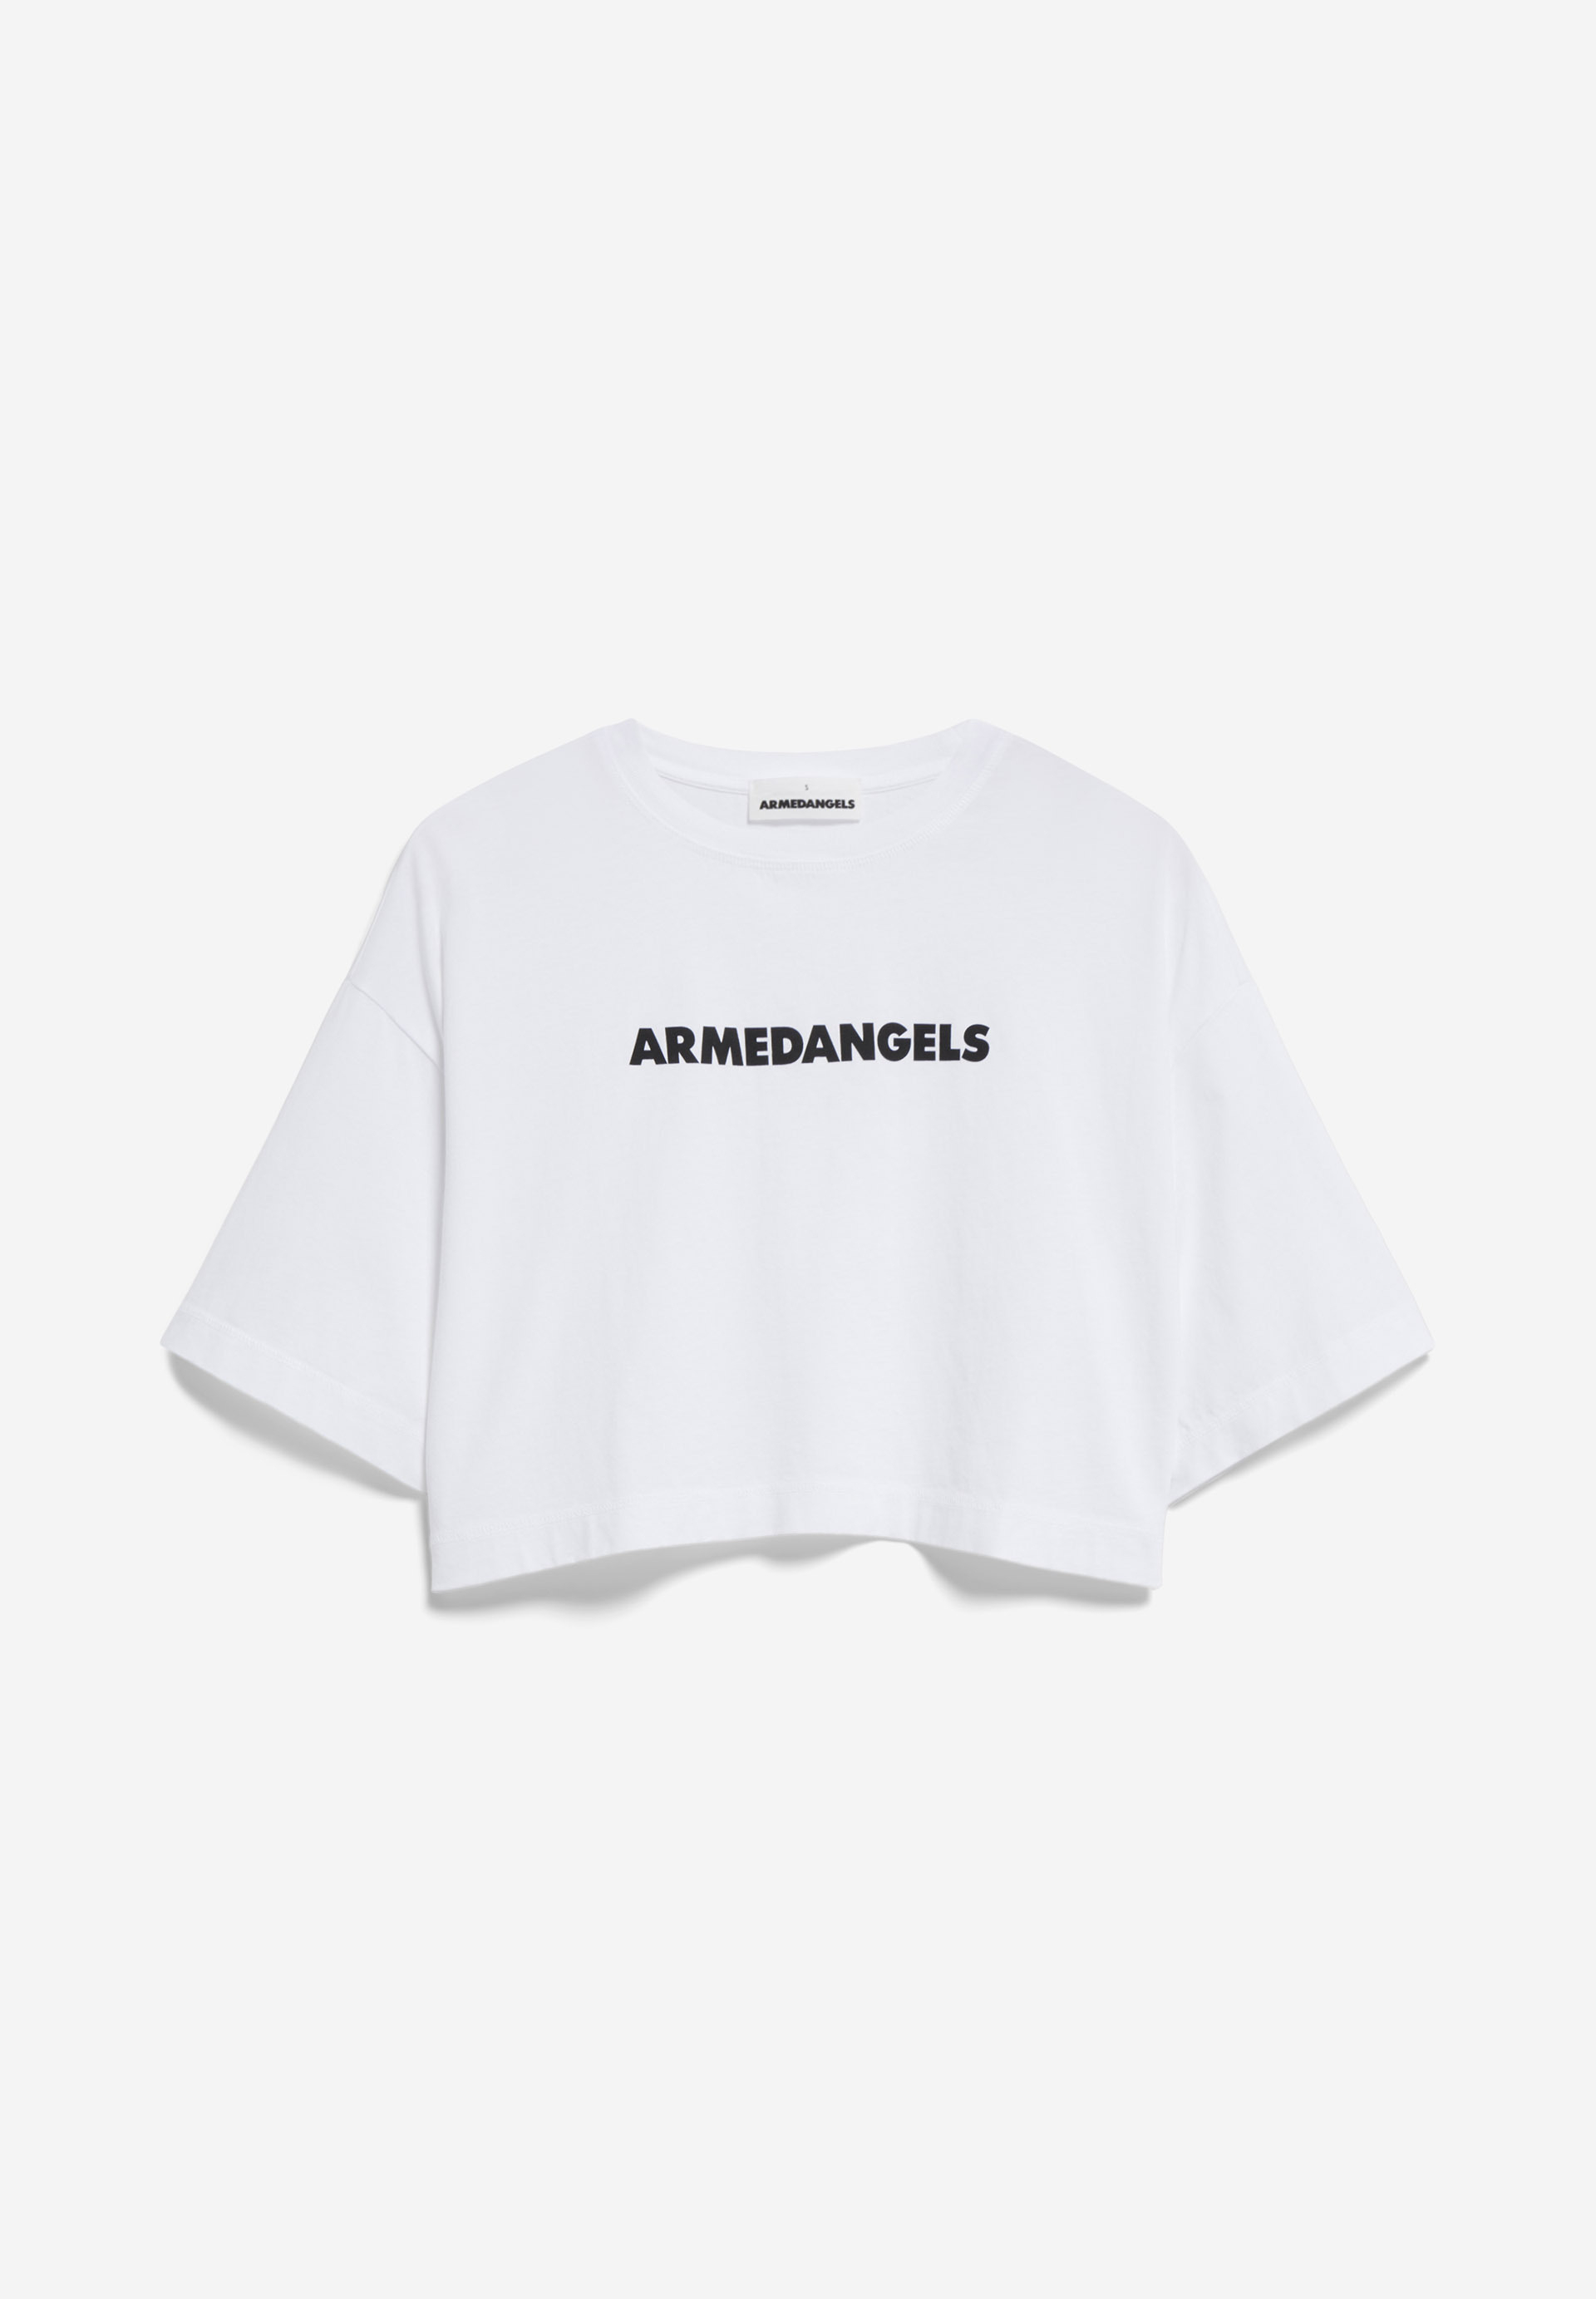 LARIAA ARMEDANGELS T-Shirt Oversized Fit made of Organic Cotton